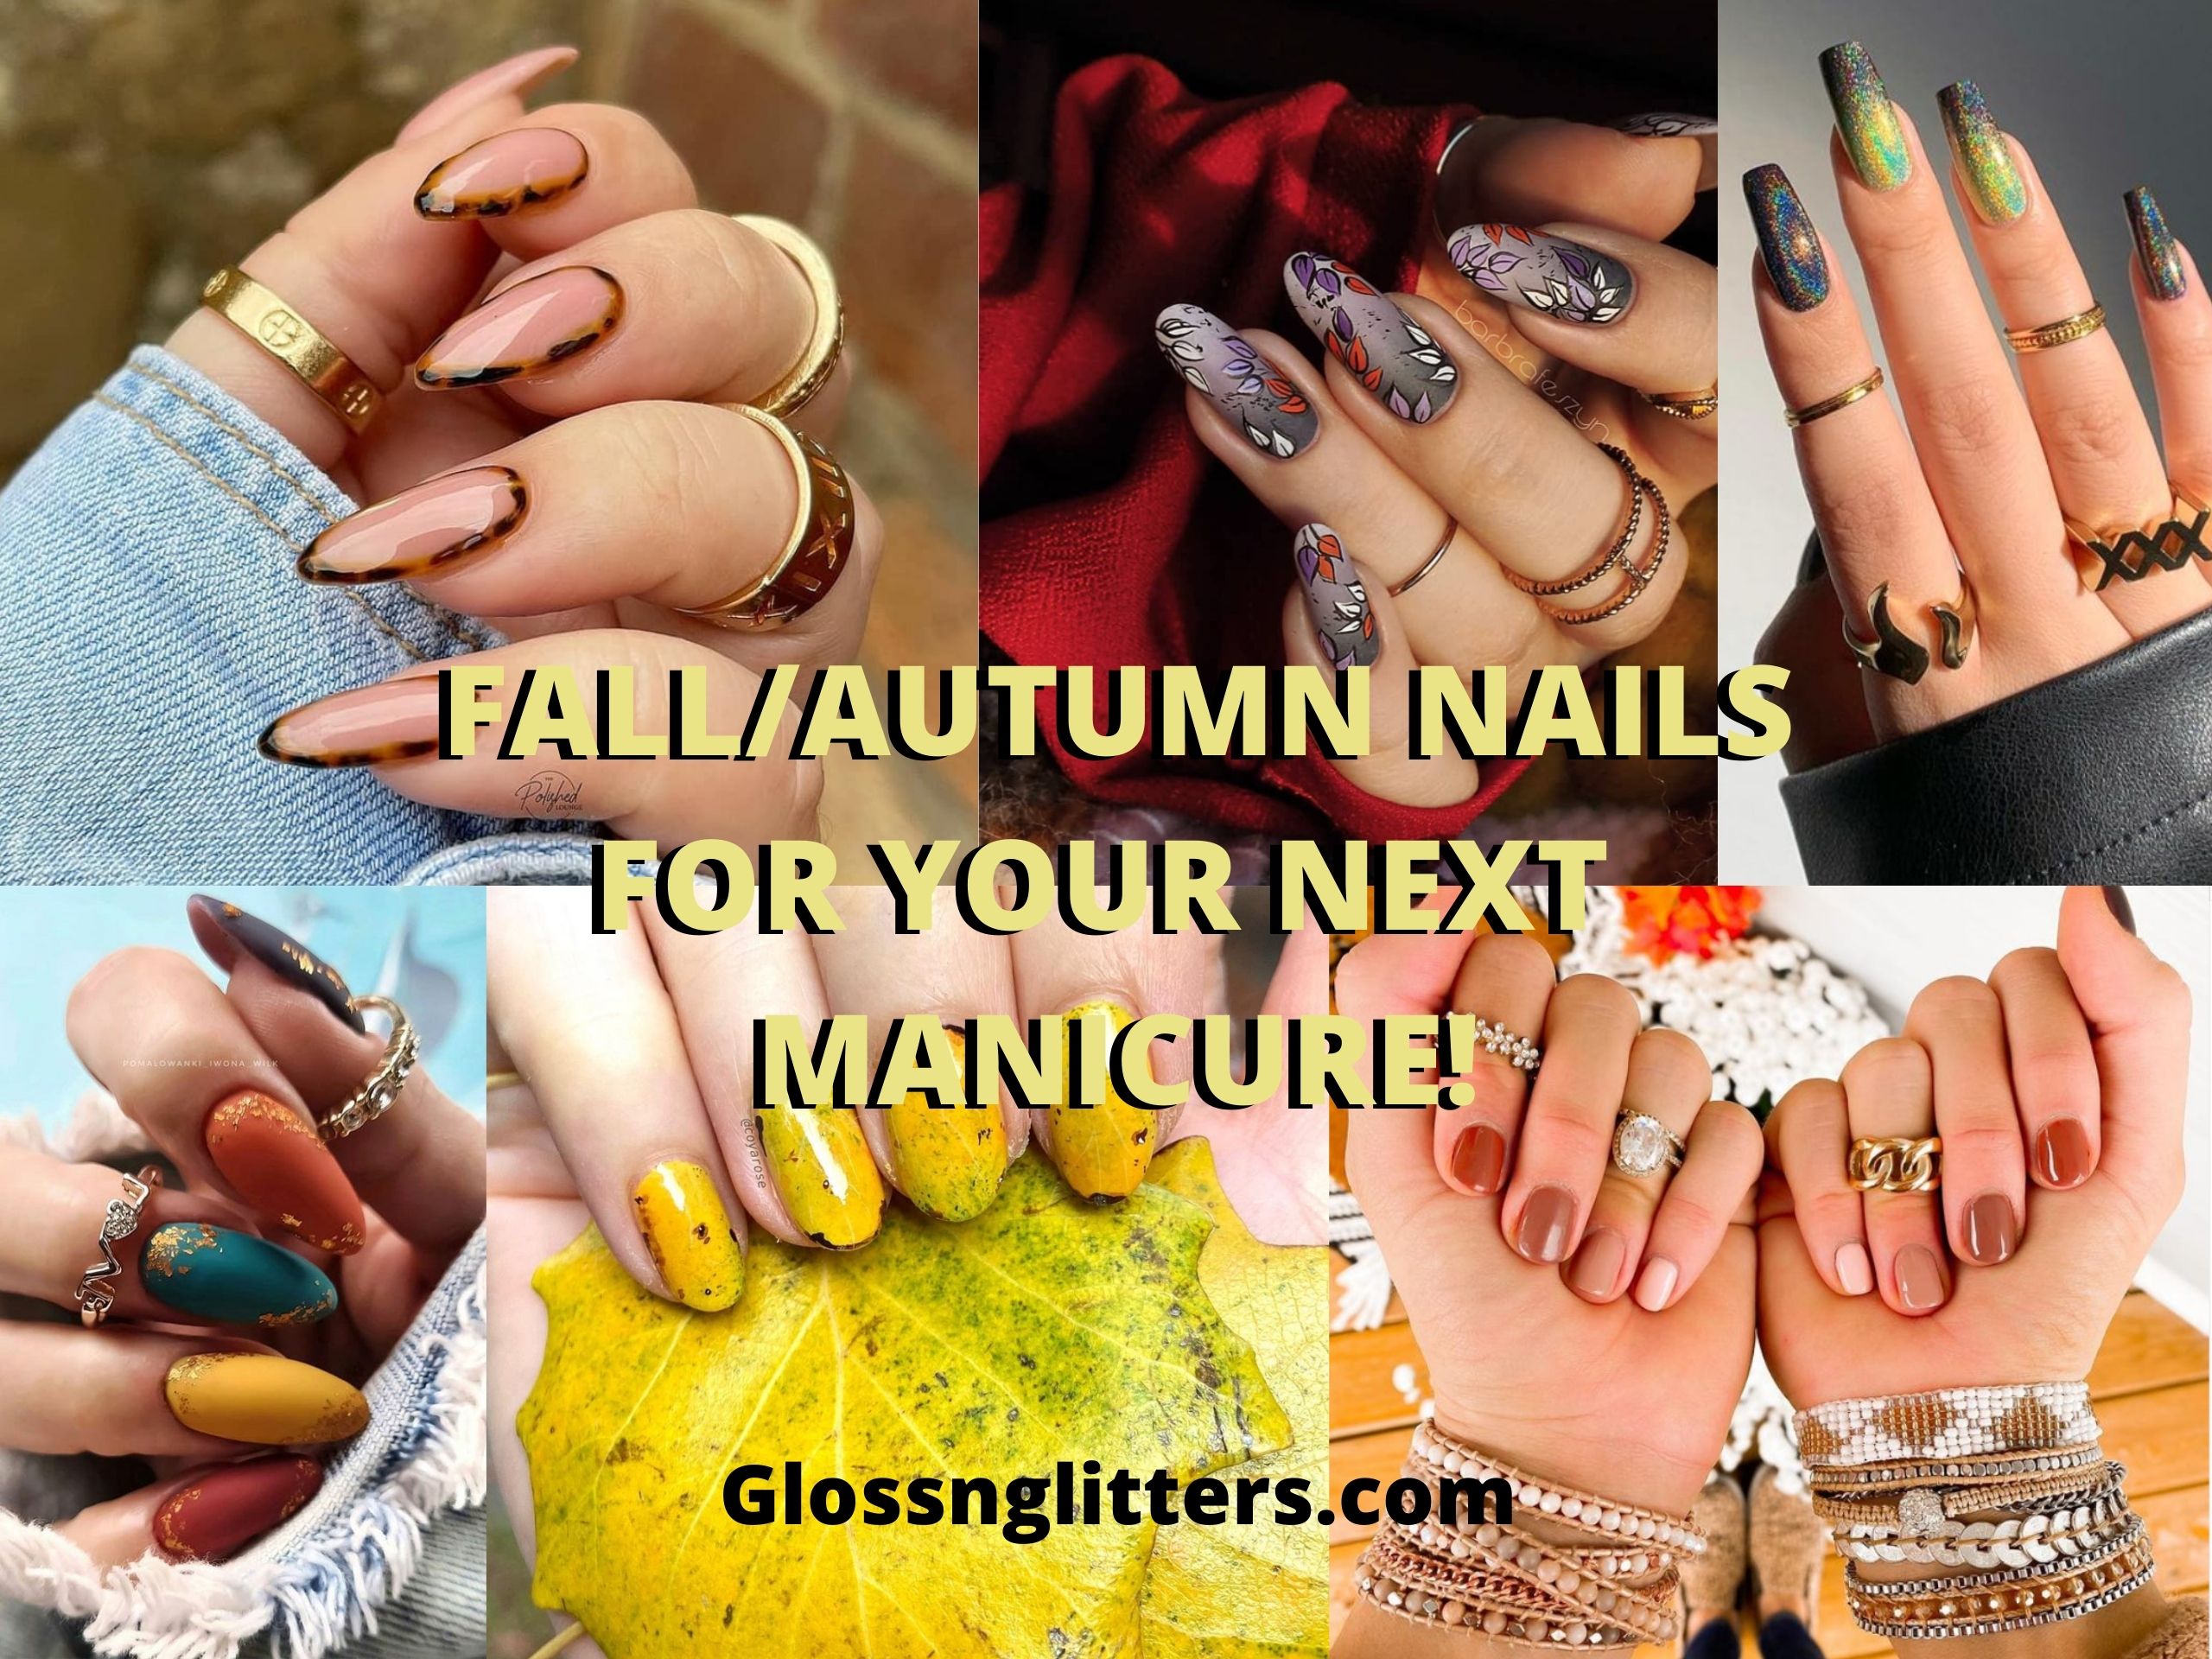 30 Beautiful Fall/Autumn Nails For Your Next Manicure - Glossnglitters